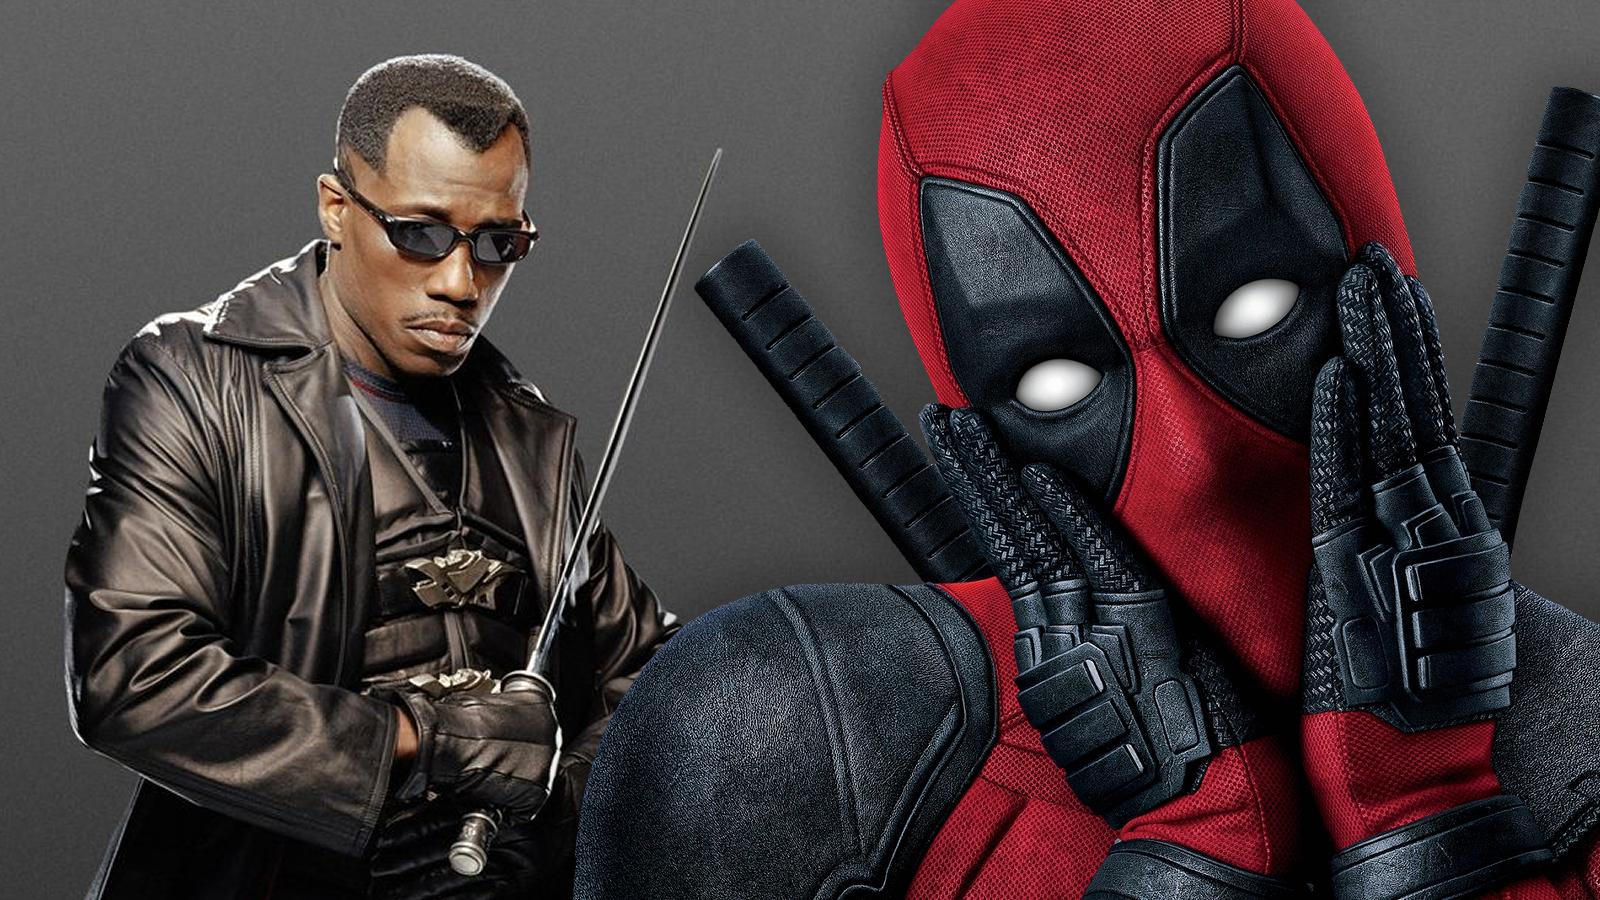 Combined promotional stills from Deadpool and Blade: Trinity.